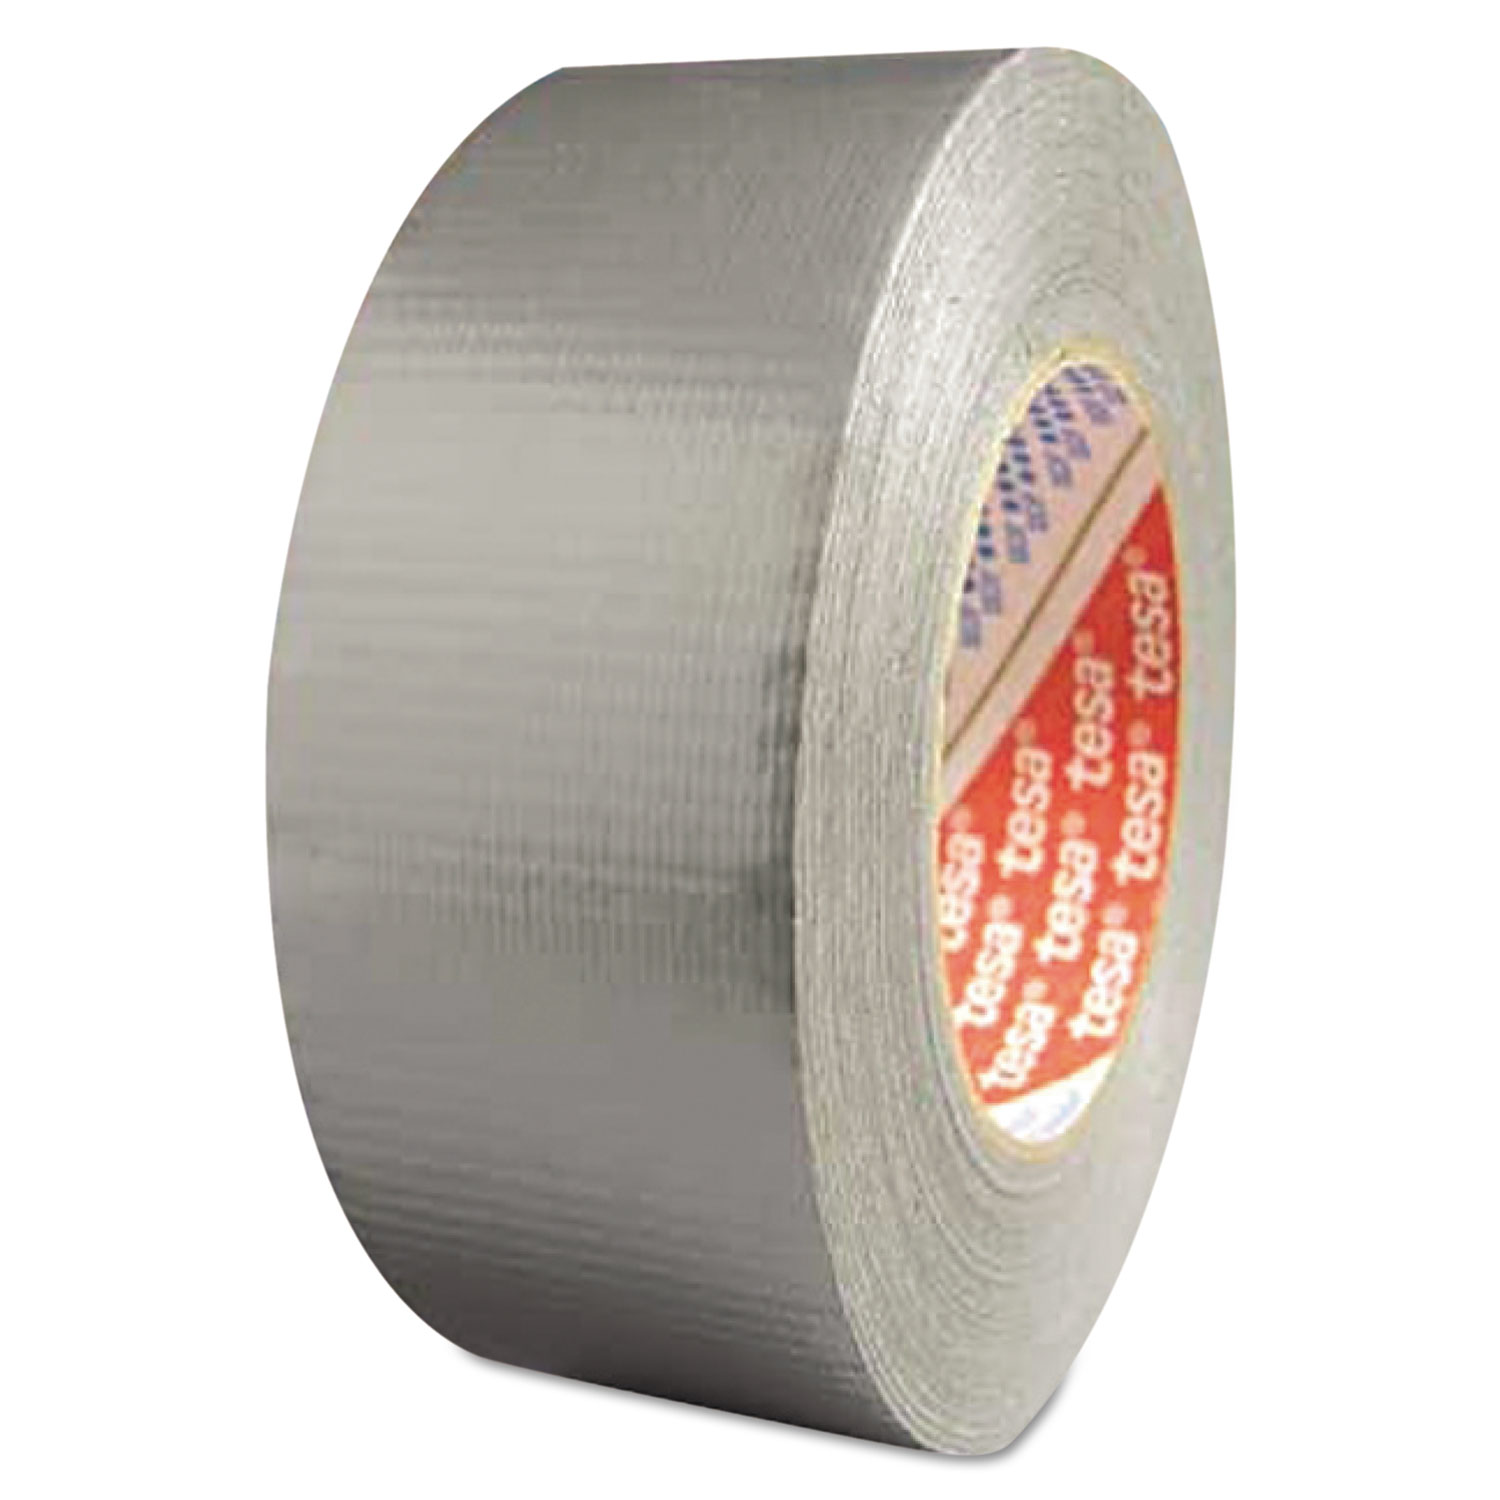 Utility Grade Duct Tape, 2 x 60yd, Silver